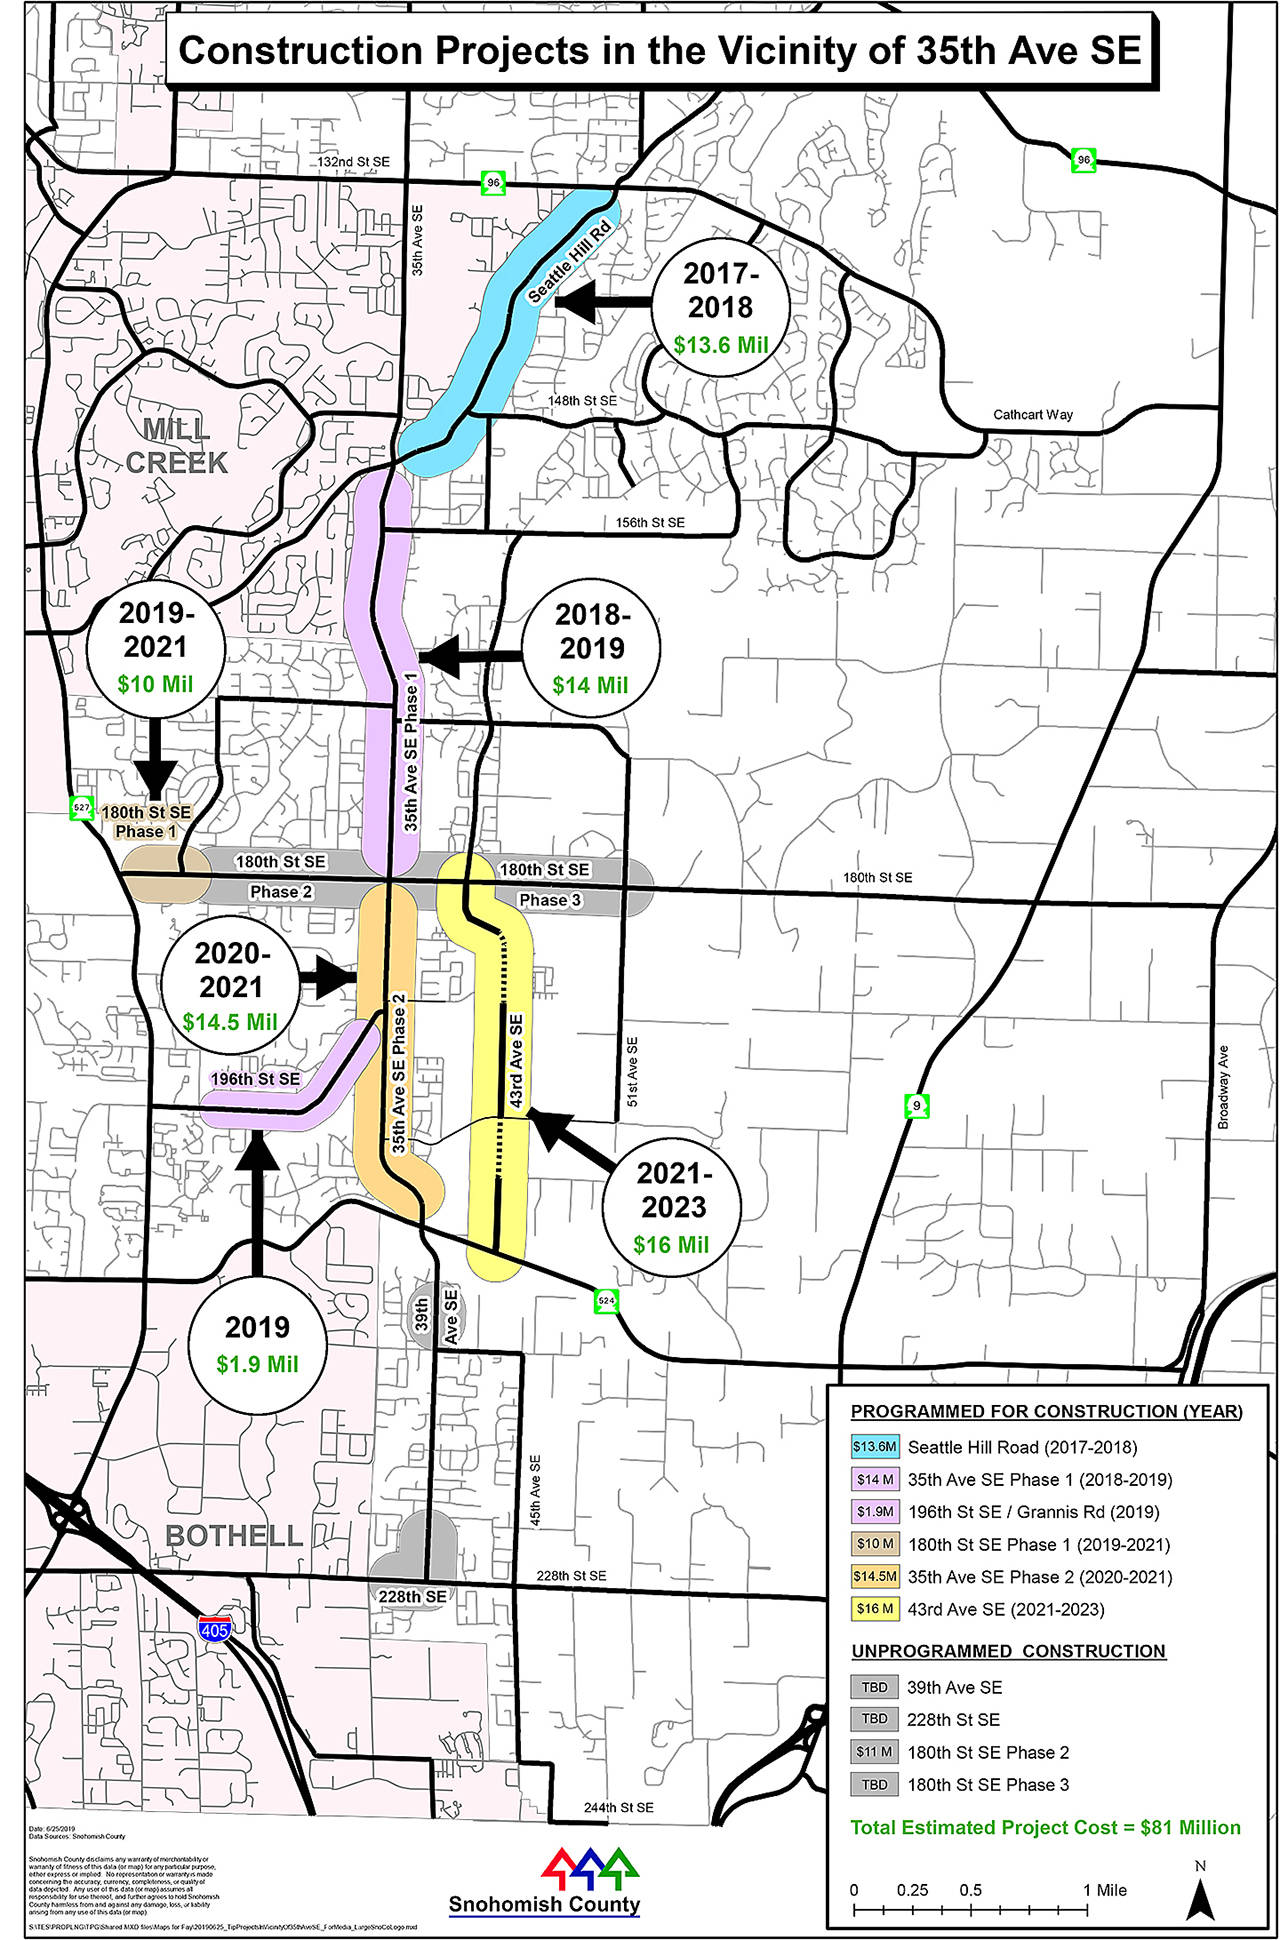 The map shows construction projects around 35th Avenue SE. (Snohomish County Public Works)